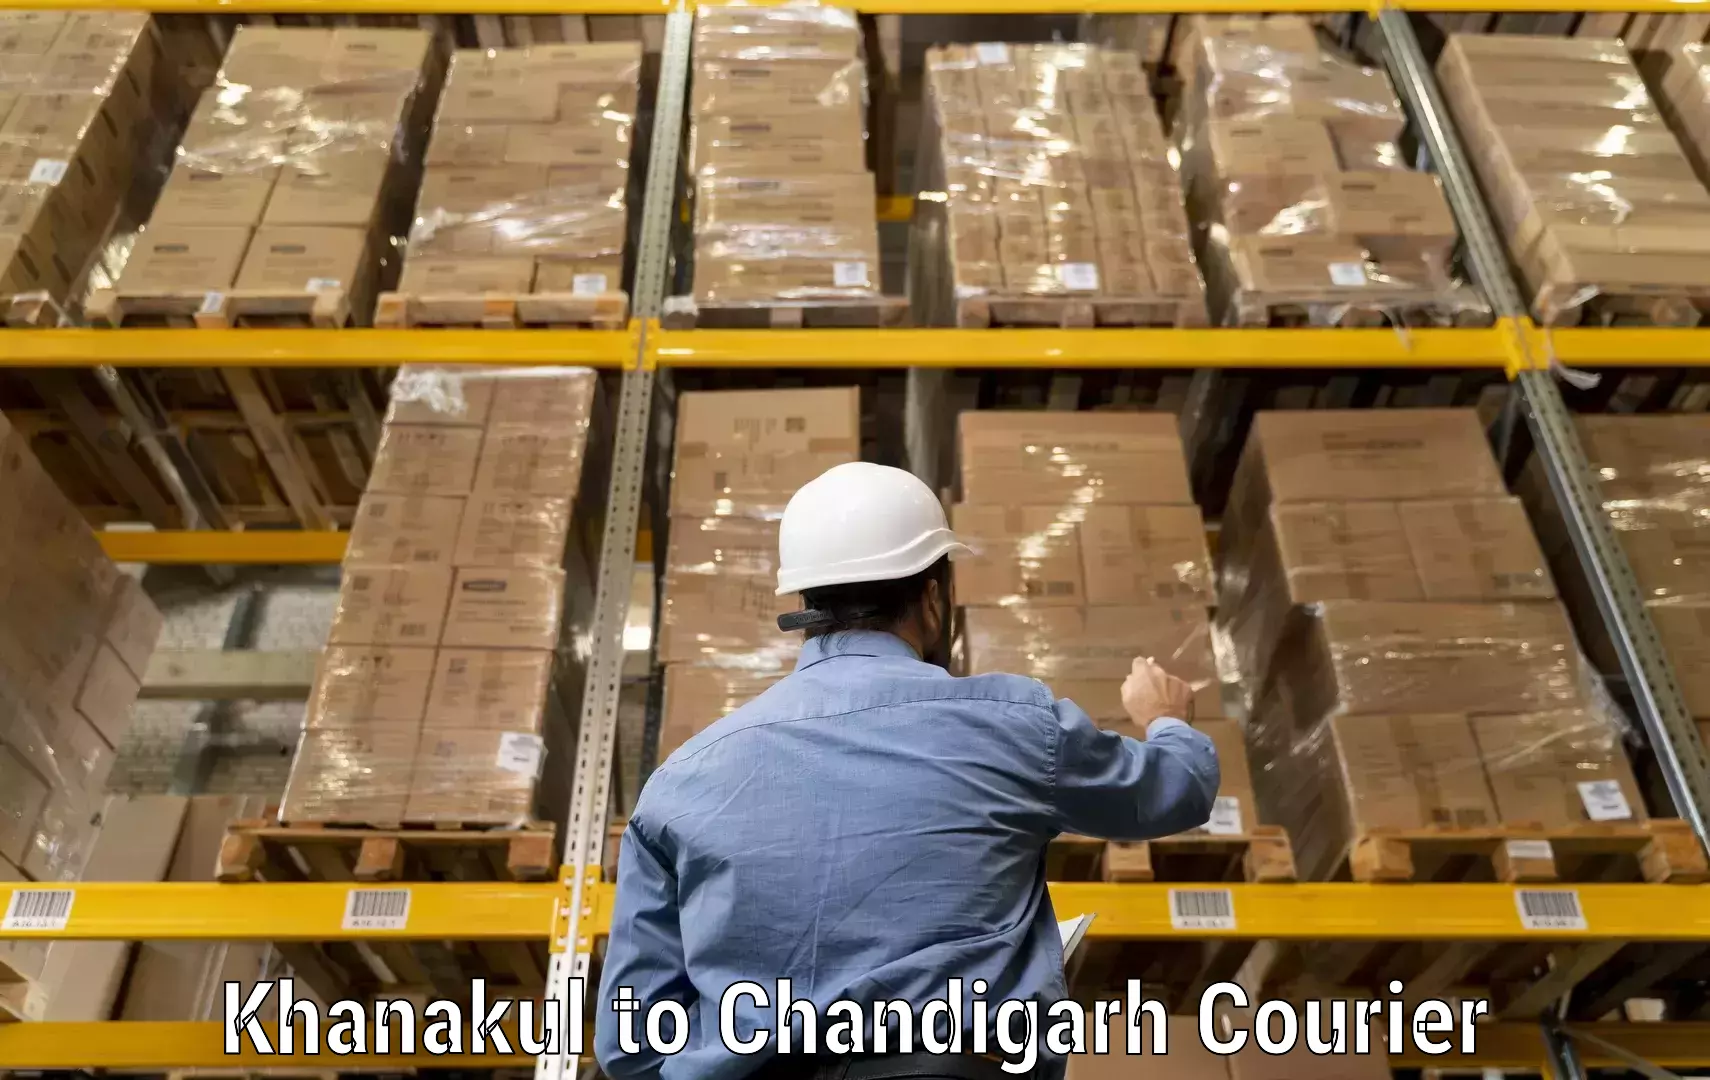 Courier service comparison in Khanakul to Chandigarh